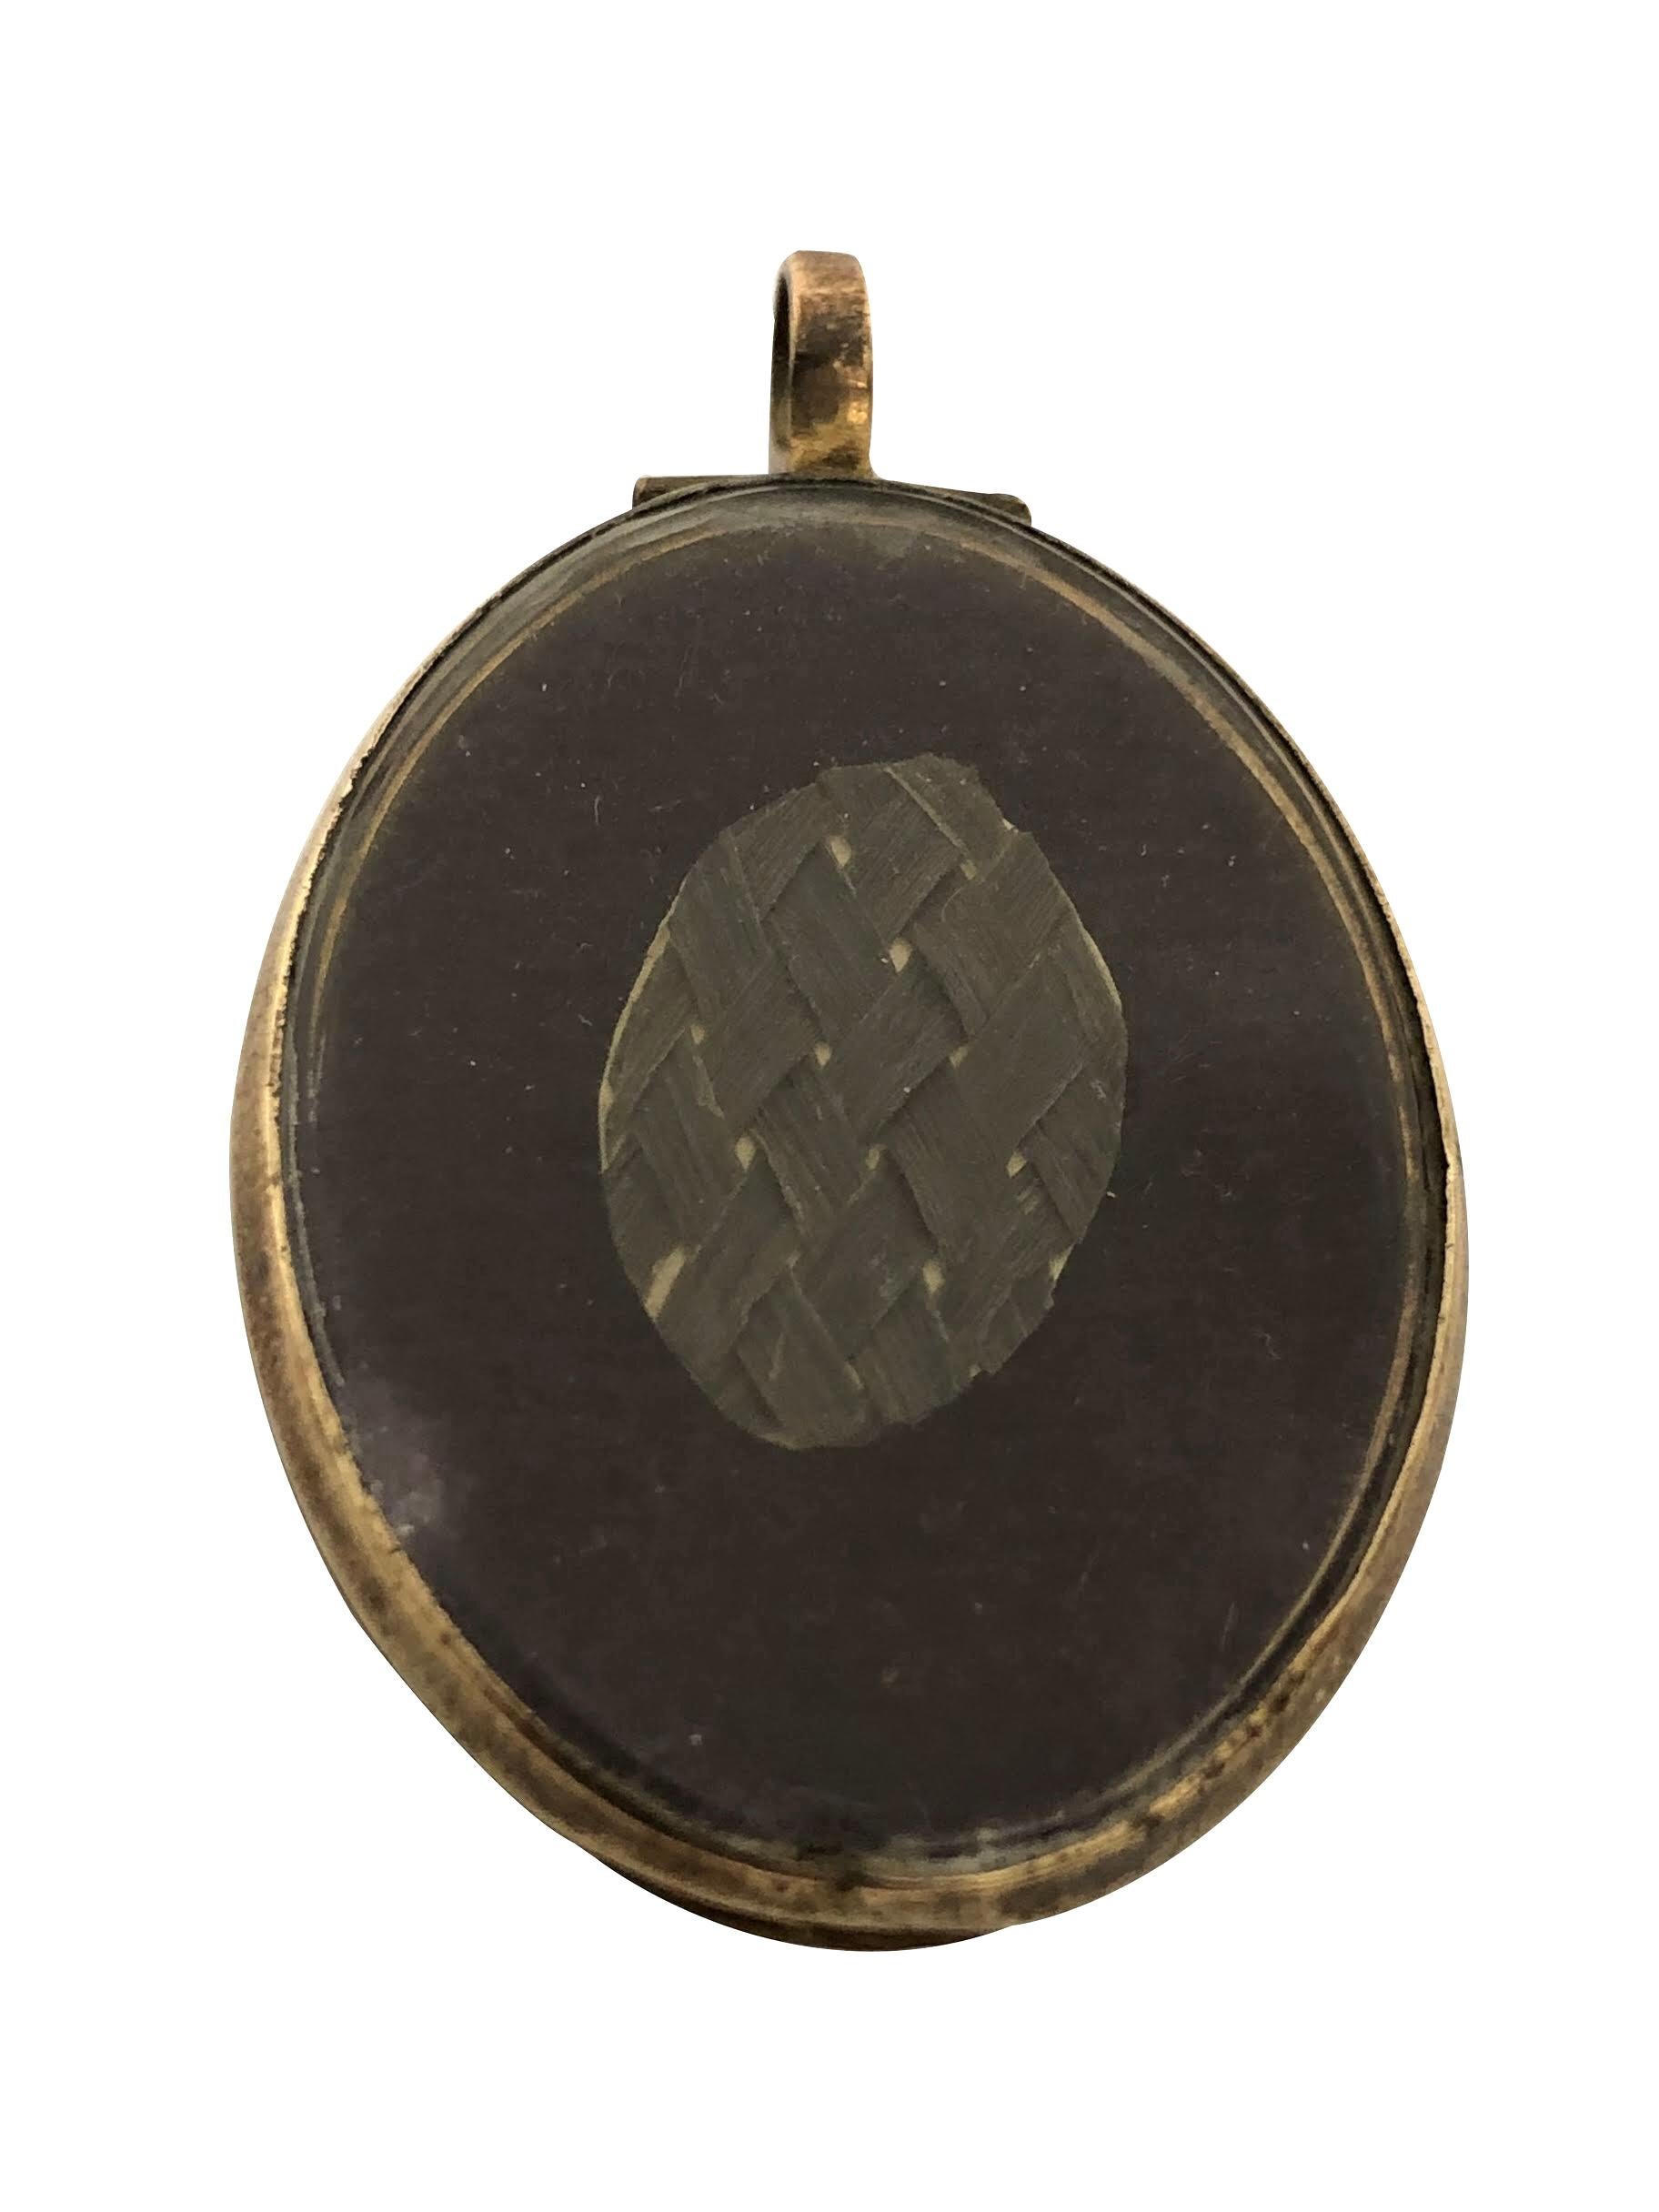 Circa 1800 Yellow Gold and Hand Painted Memorial Locket with a Depiction of Britannia, this piece measures 1 3/4 X 1 1/8 inch, original glass covers both side of the locket that opens with a back side compartment having a piece of  finely woven